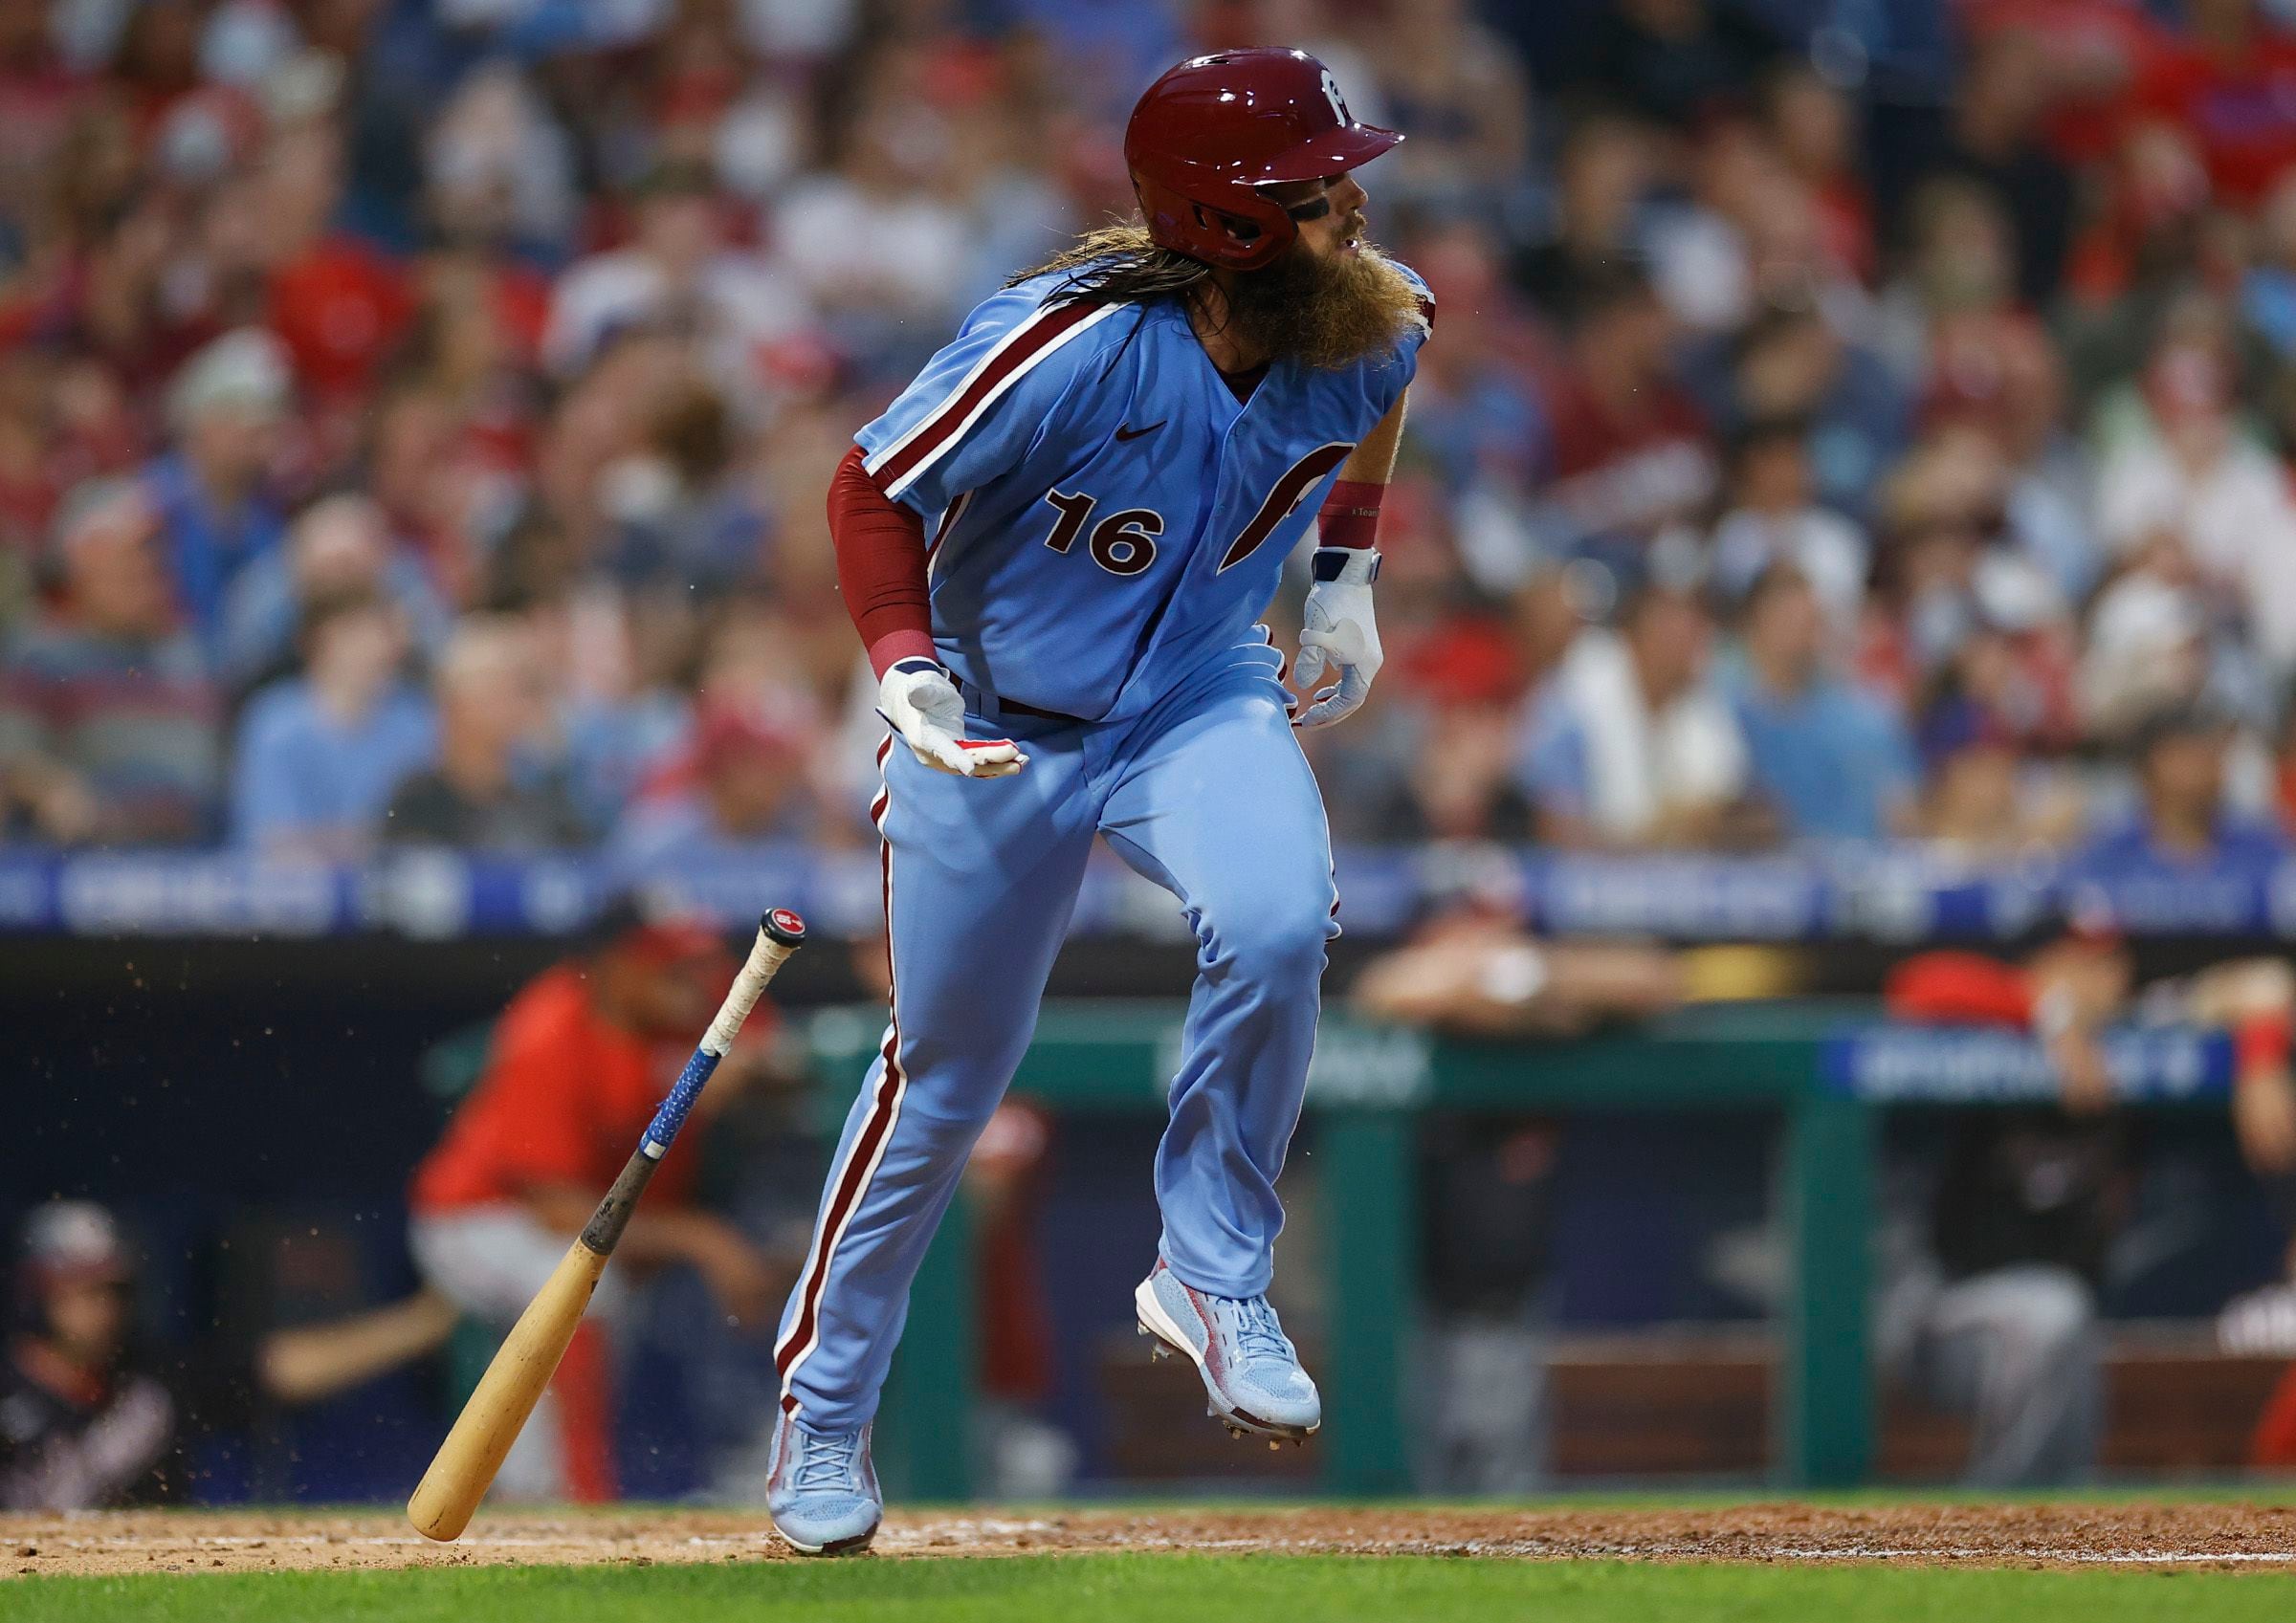 How Brandon Marsh became one of the Phillies' most consistent hitters